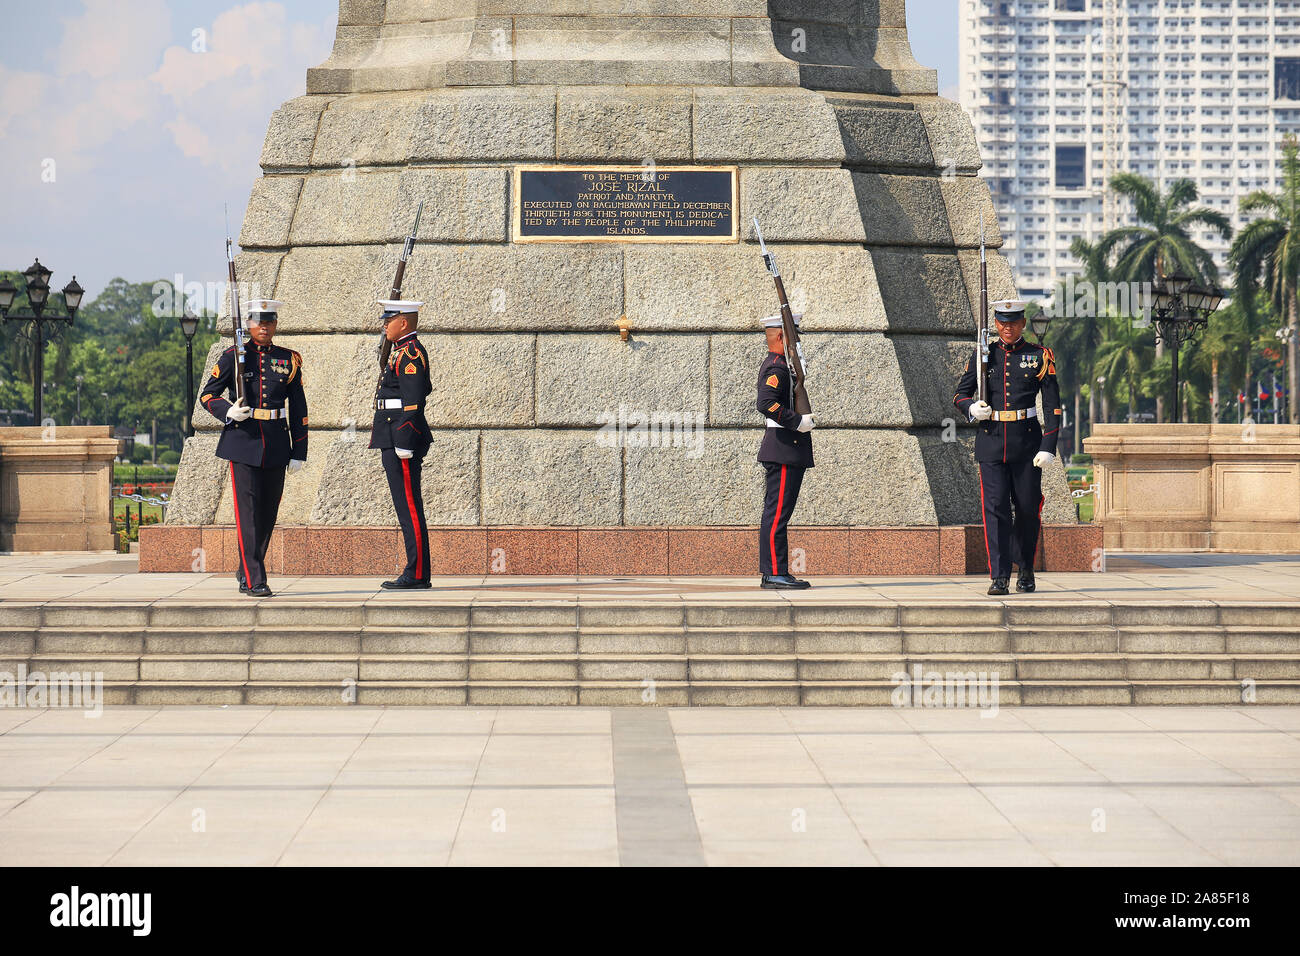 Manila, Philippines - June 24, 2017: Changing of the guard at the Rizal memorial Stock Photo